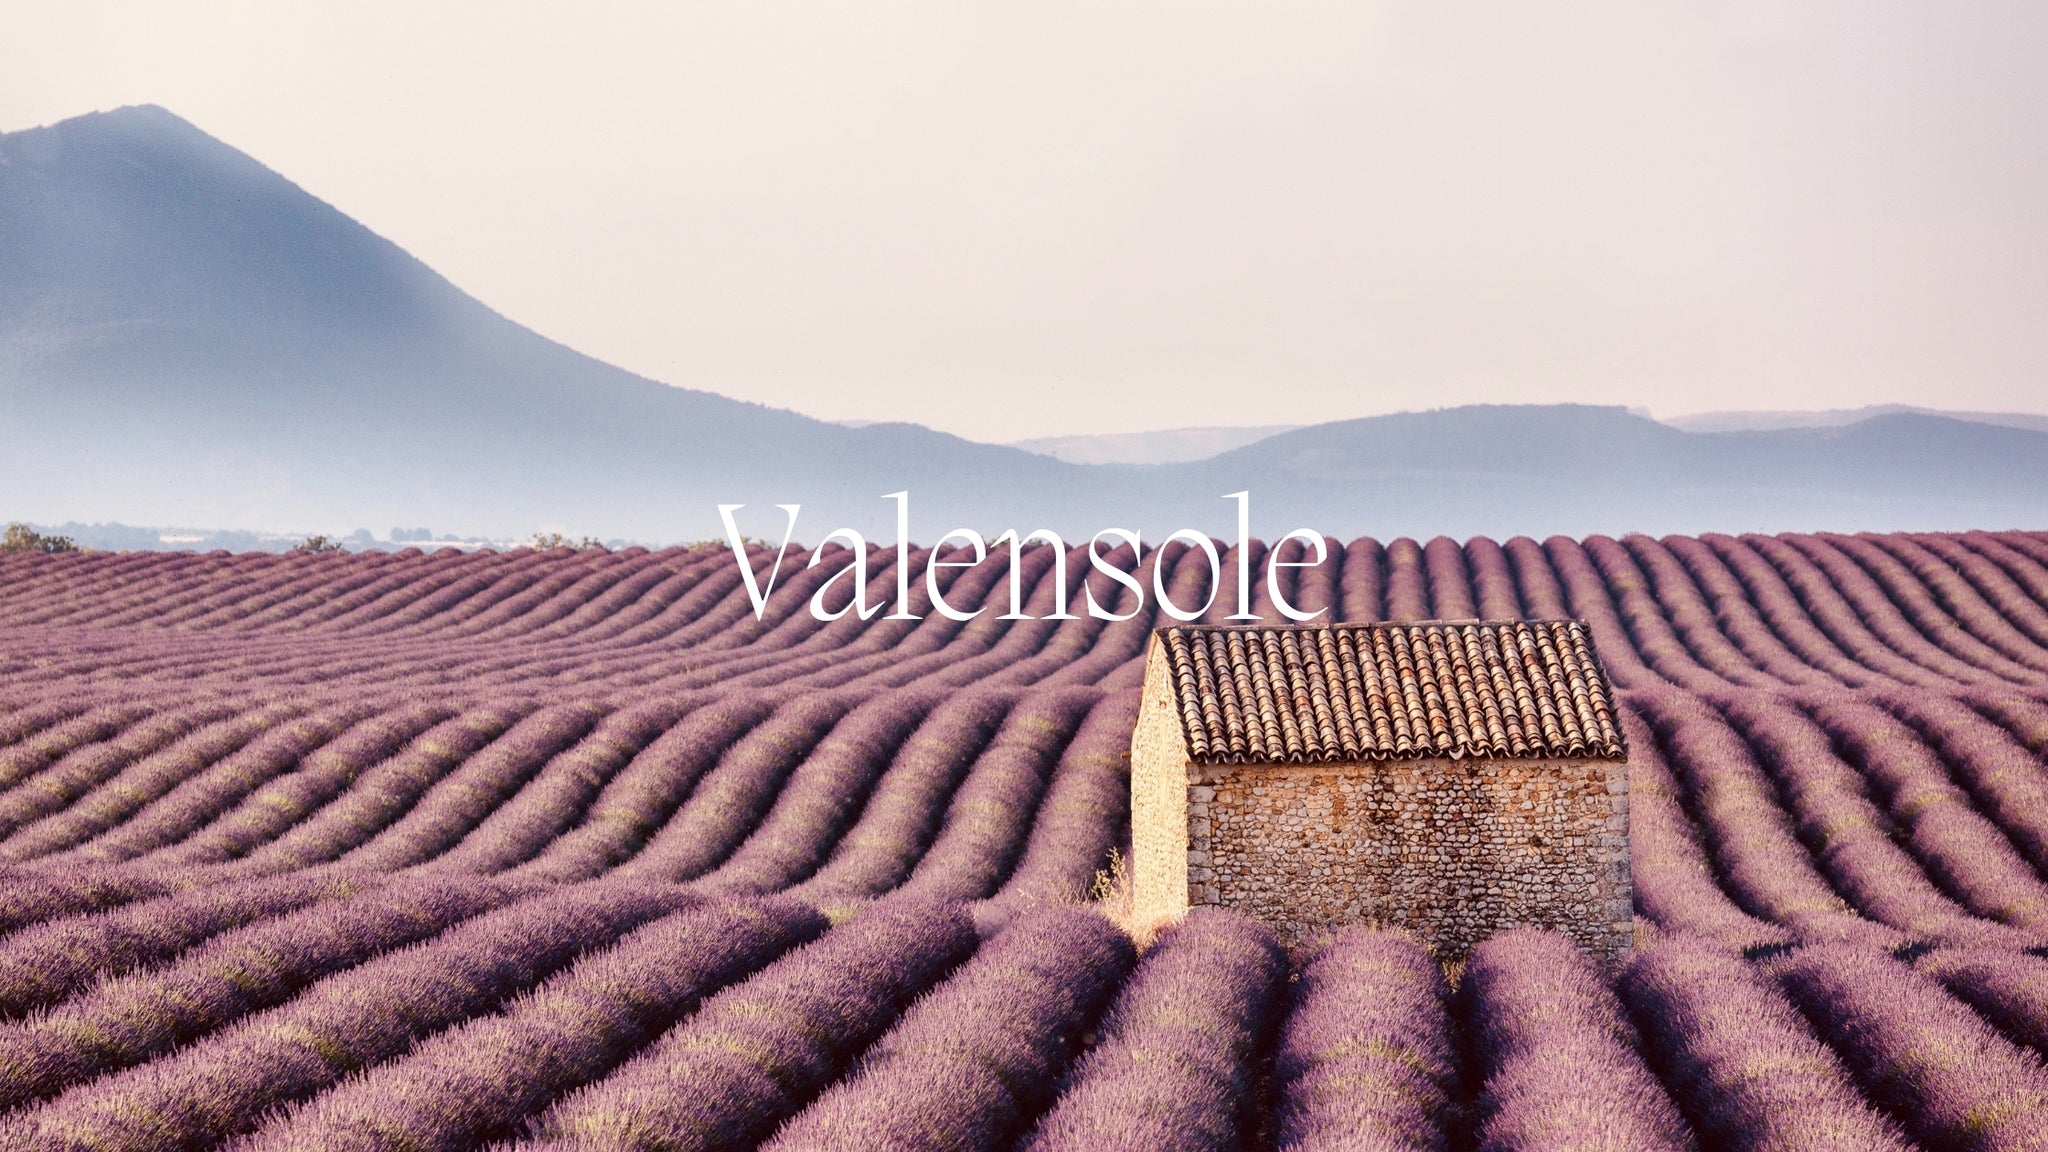 Image of the lavender fields of Valensol